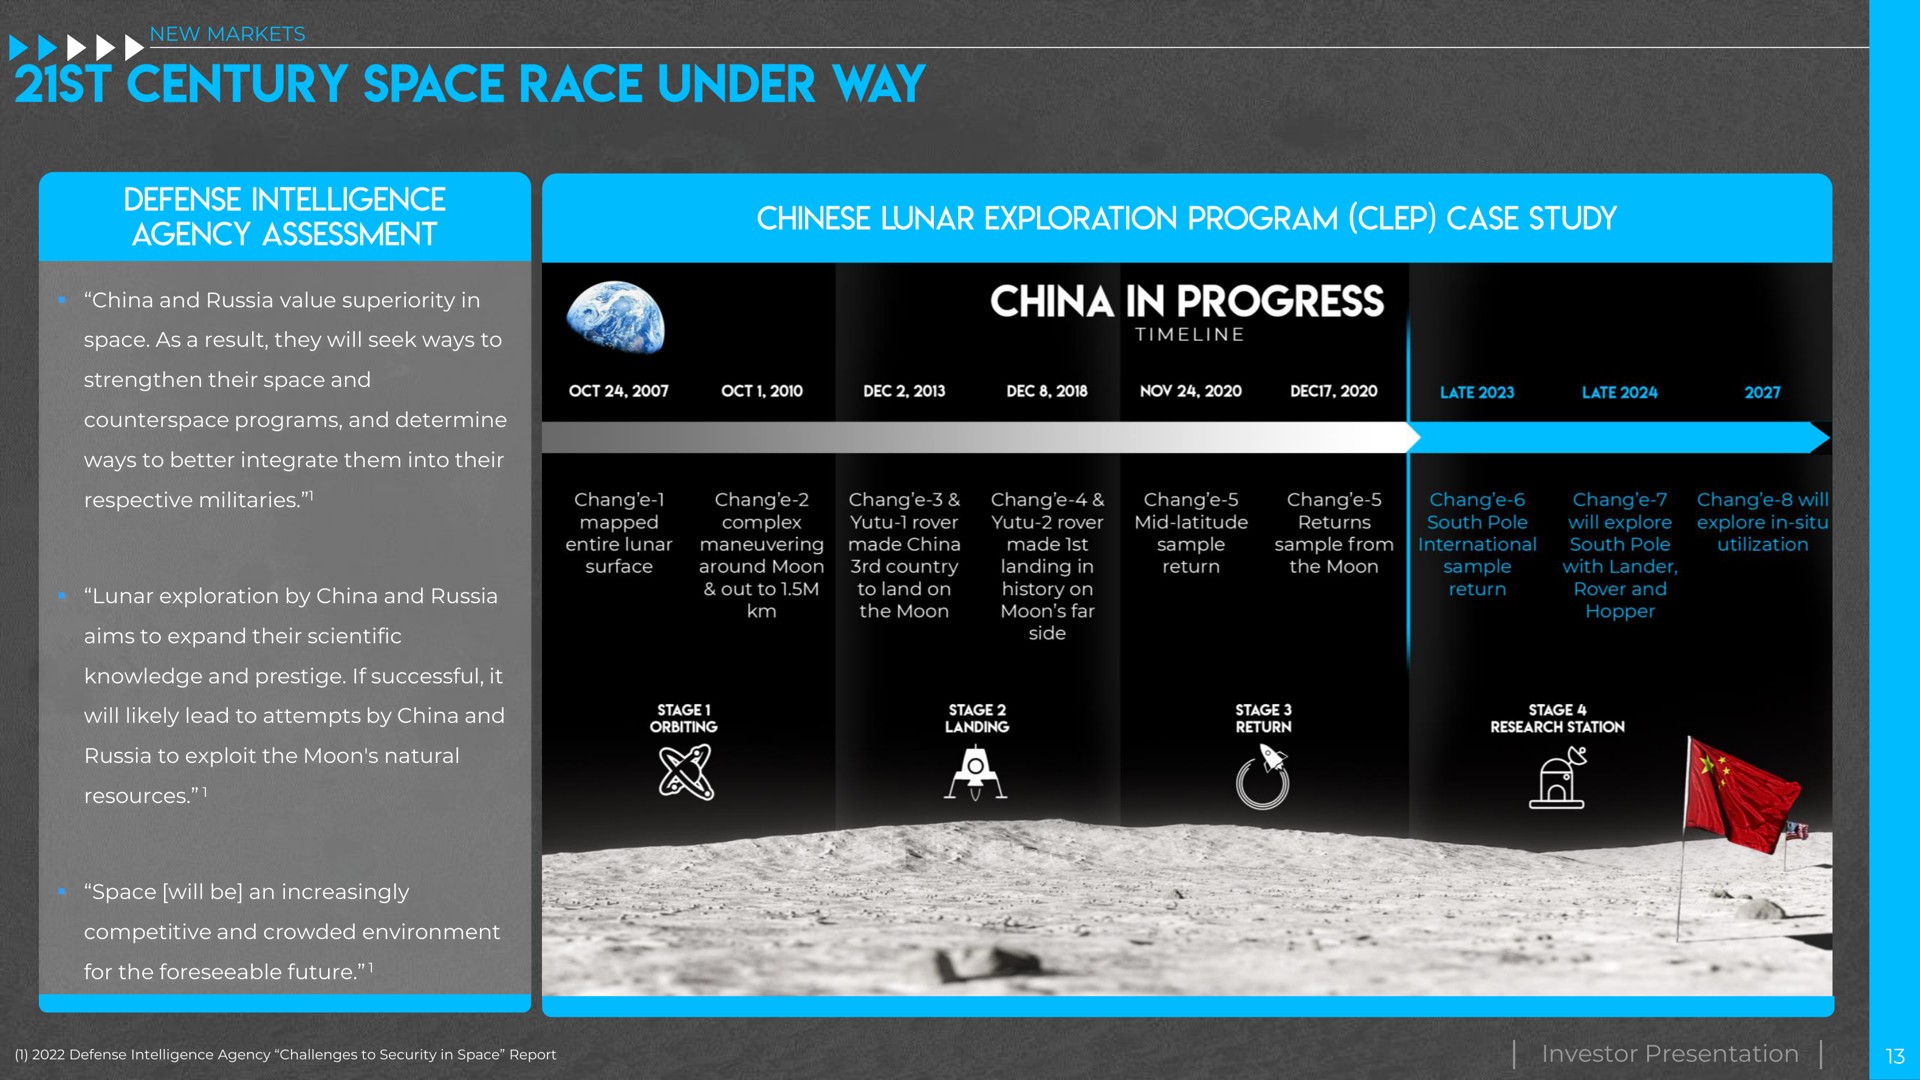 china and russia value superiority in space as a result they will seek ways to strengthen their space and programs and determine ways to better integrate them into their respective militaries lunar exploration by china and russia aims to expand their scientific knowledge and prestige if successful it will likely lead to attempts by china and russia to exploit the moon natural resources space will be an increasingly competitive and crowded environment for the foreseeable future investor presentation uva | Intuitive Machines